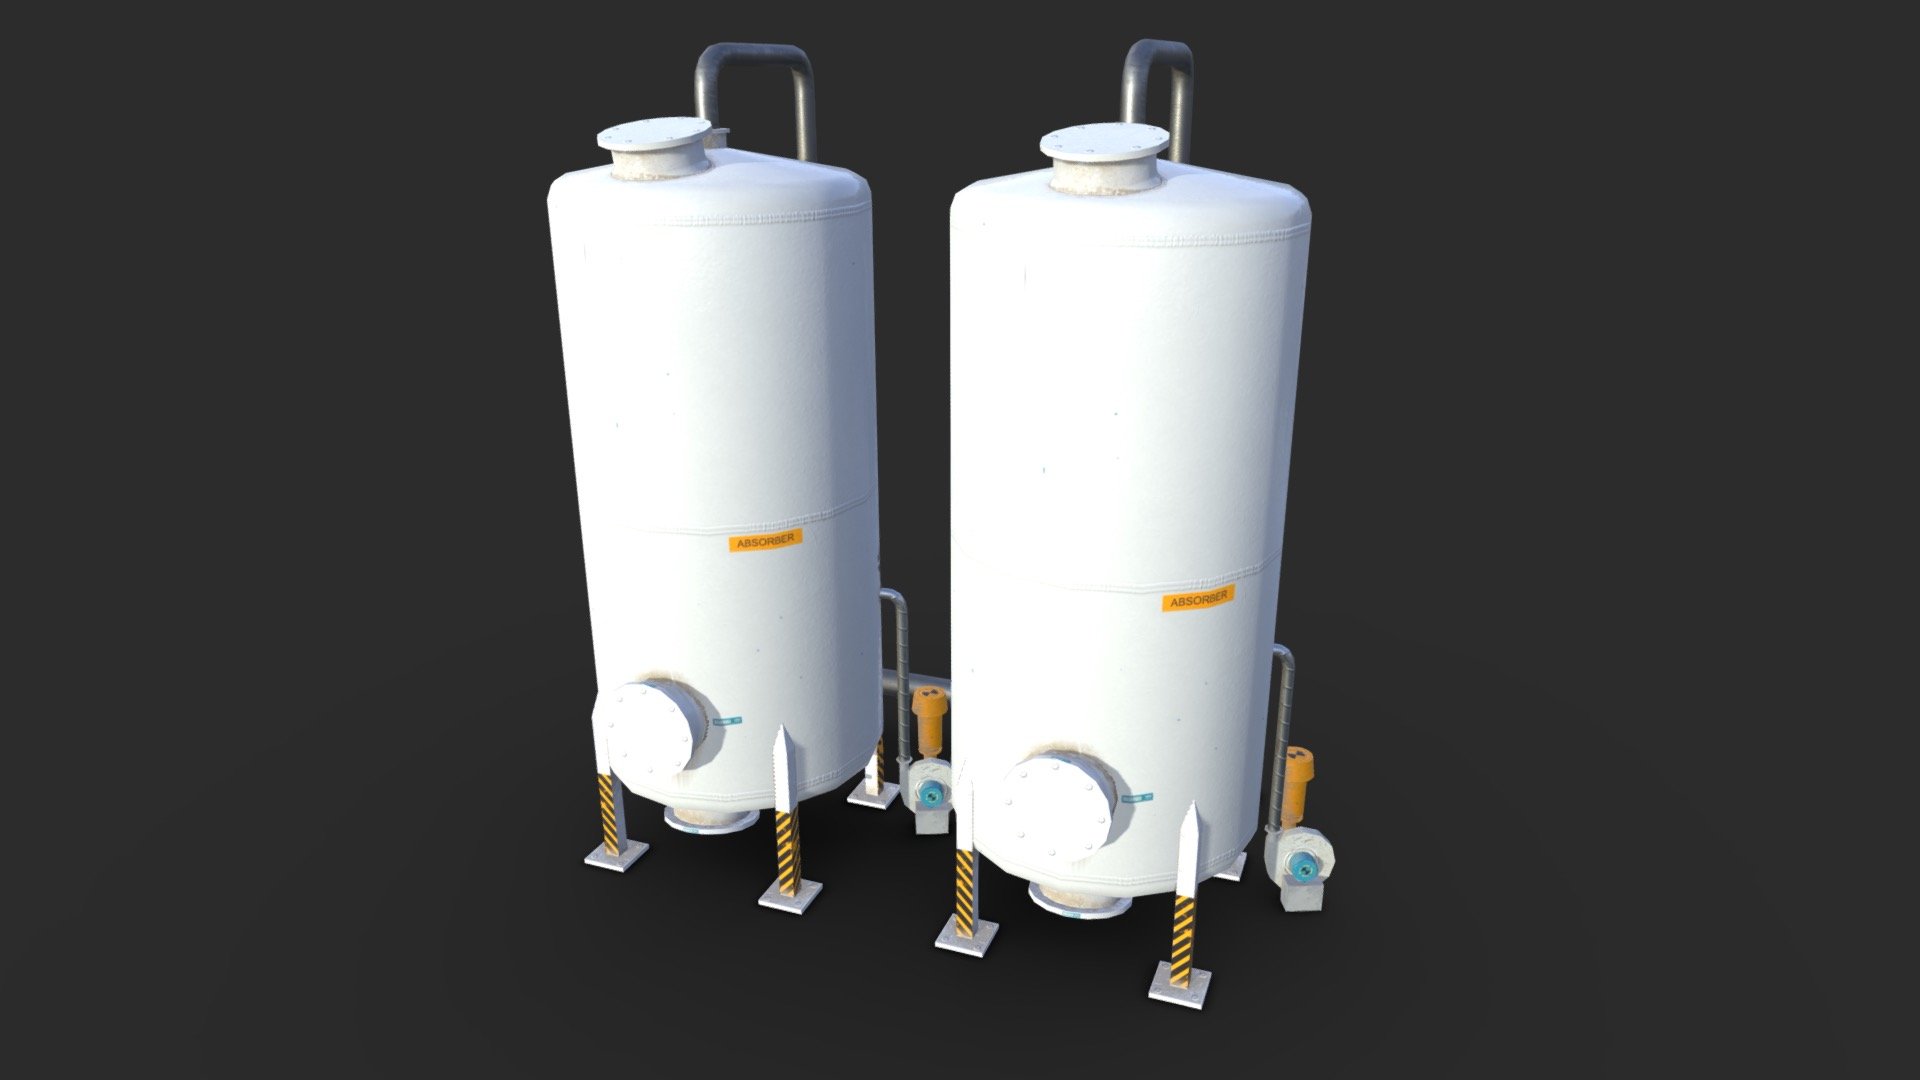 This industrial absorbent tank including 4 LODs each to get the best optimization and the best quality. This petroleum industrial props is used in petroleum treatment factory and in any chemical installations for storage too.

This AAA game asset of industrial tank will embellish you scene and add more details which can help the gameplay and the game-design.

The material of models is unique and ready for PBR.

Low-poly model &amp; Blender native 2.90

SPECIFICATIONS


Objects : 1
Polygons : 2606
Subdivision ready : No
Render engine : Eevee (Cycles ready)

GAME SPECS


LODs : Yes (inside FBX for Unity &amp; Unreal)
Numbers of LODs : 4
Collider : No
Lightmap UV : Yes

EXPORTED FORMATS


FBX
Collada
OBJ

TEXTURES


Materials in scene : 1
Textures sizes : 4K
Textures types : Base Color, Metallic, Roughness, Normal (DirectX &amp; OpenGL), Heigh, AO
Textures format : PNG

GENERAL


Real scale : Yes
 - Industrial Absorbent Tank - Buy Royalty Free 3D model by KangaroOz 3D (@KangaroOz-3D) 3d model